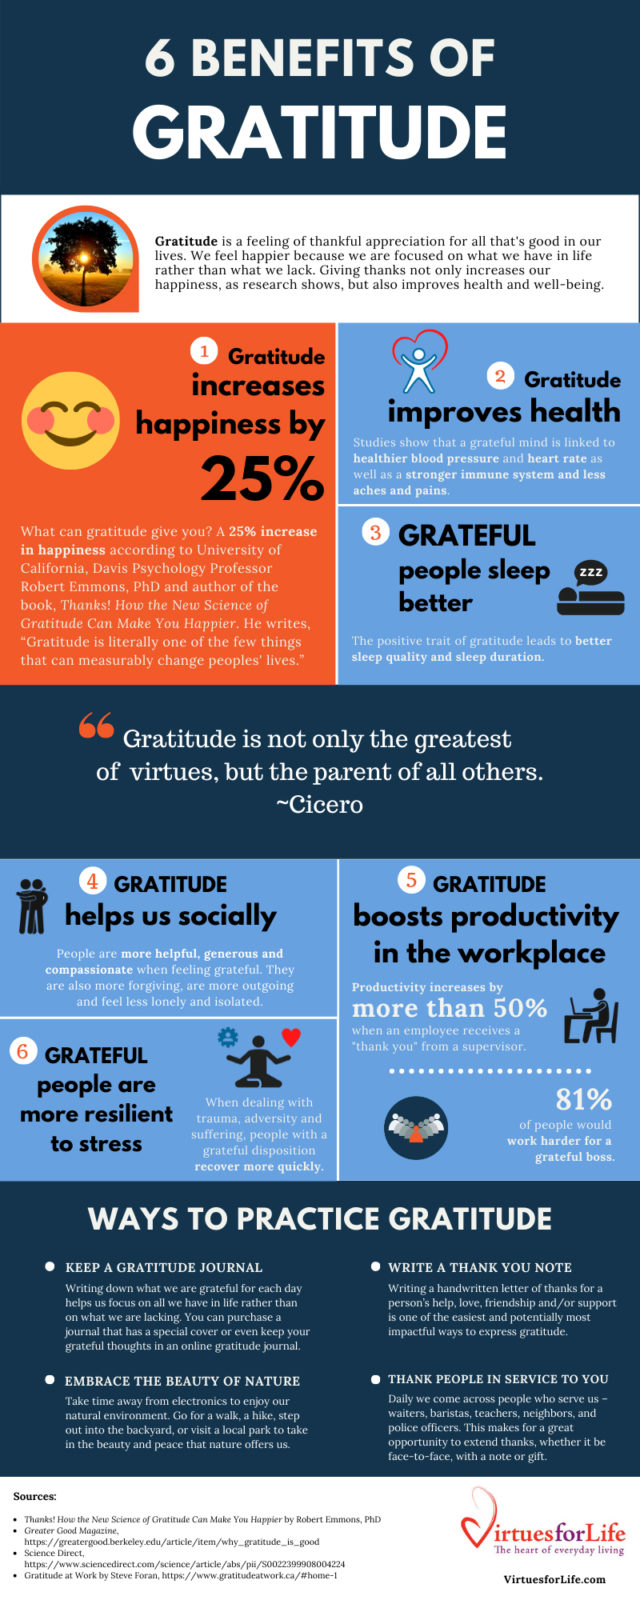 6-benefits-of-gratitude-how-feeling-grateful-is-good-for-us-infographic